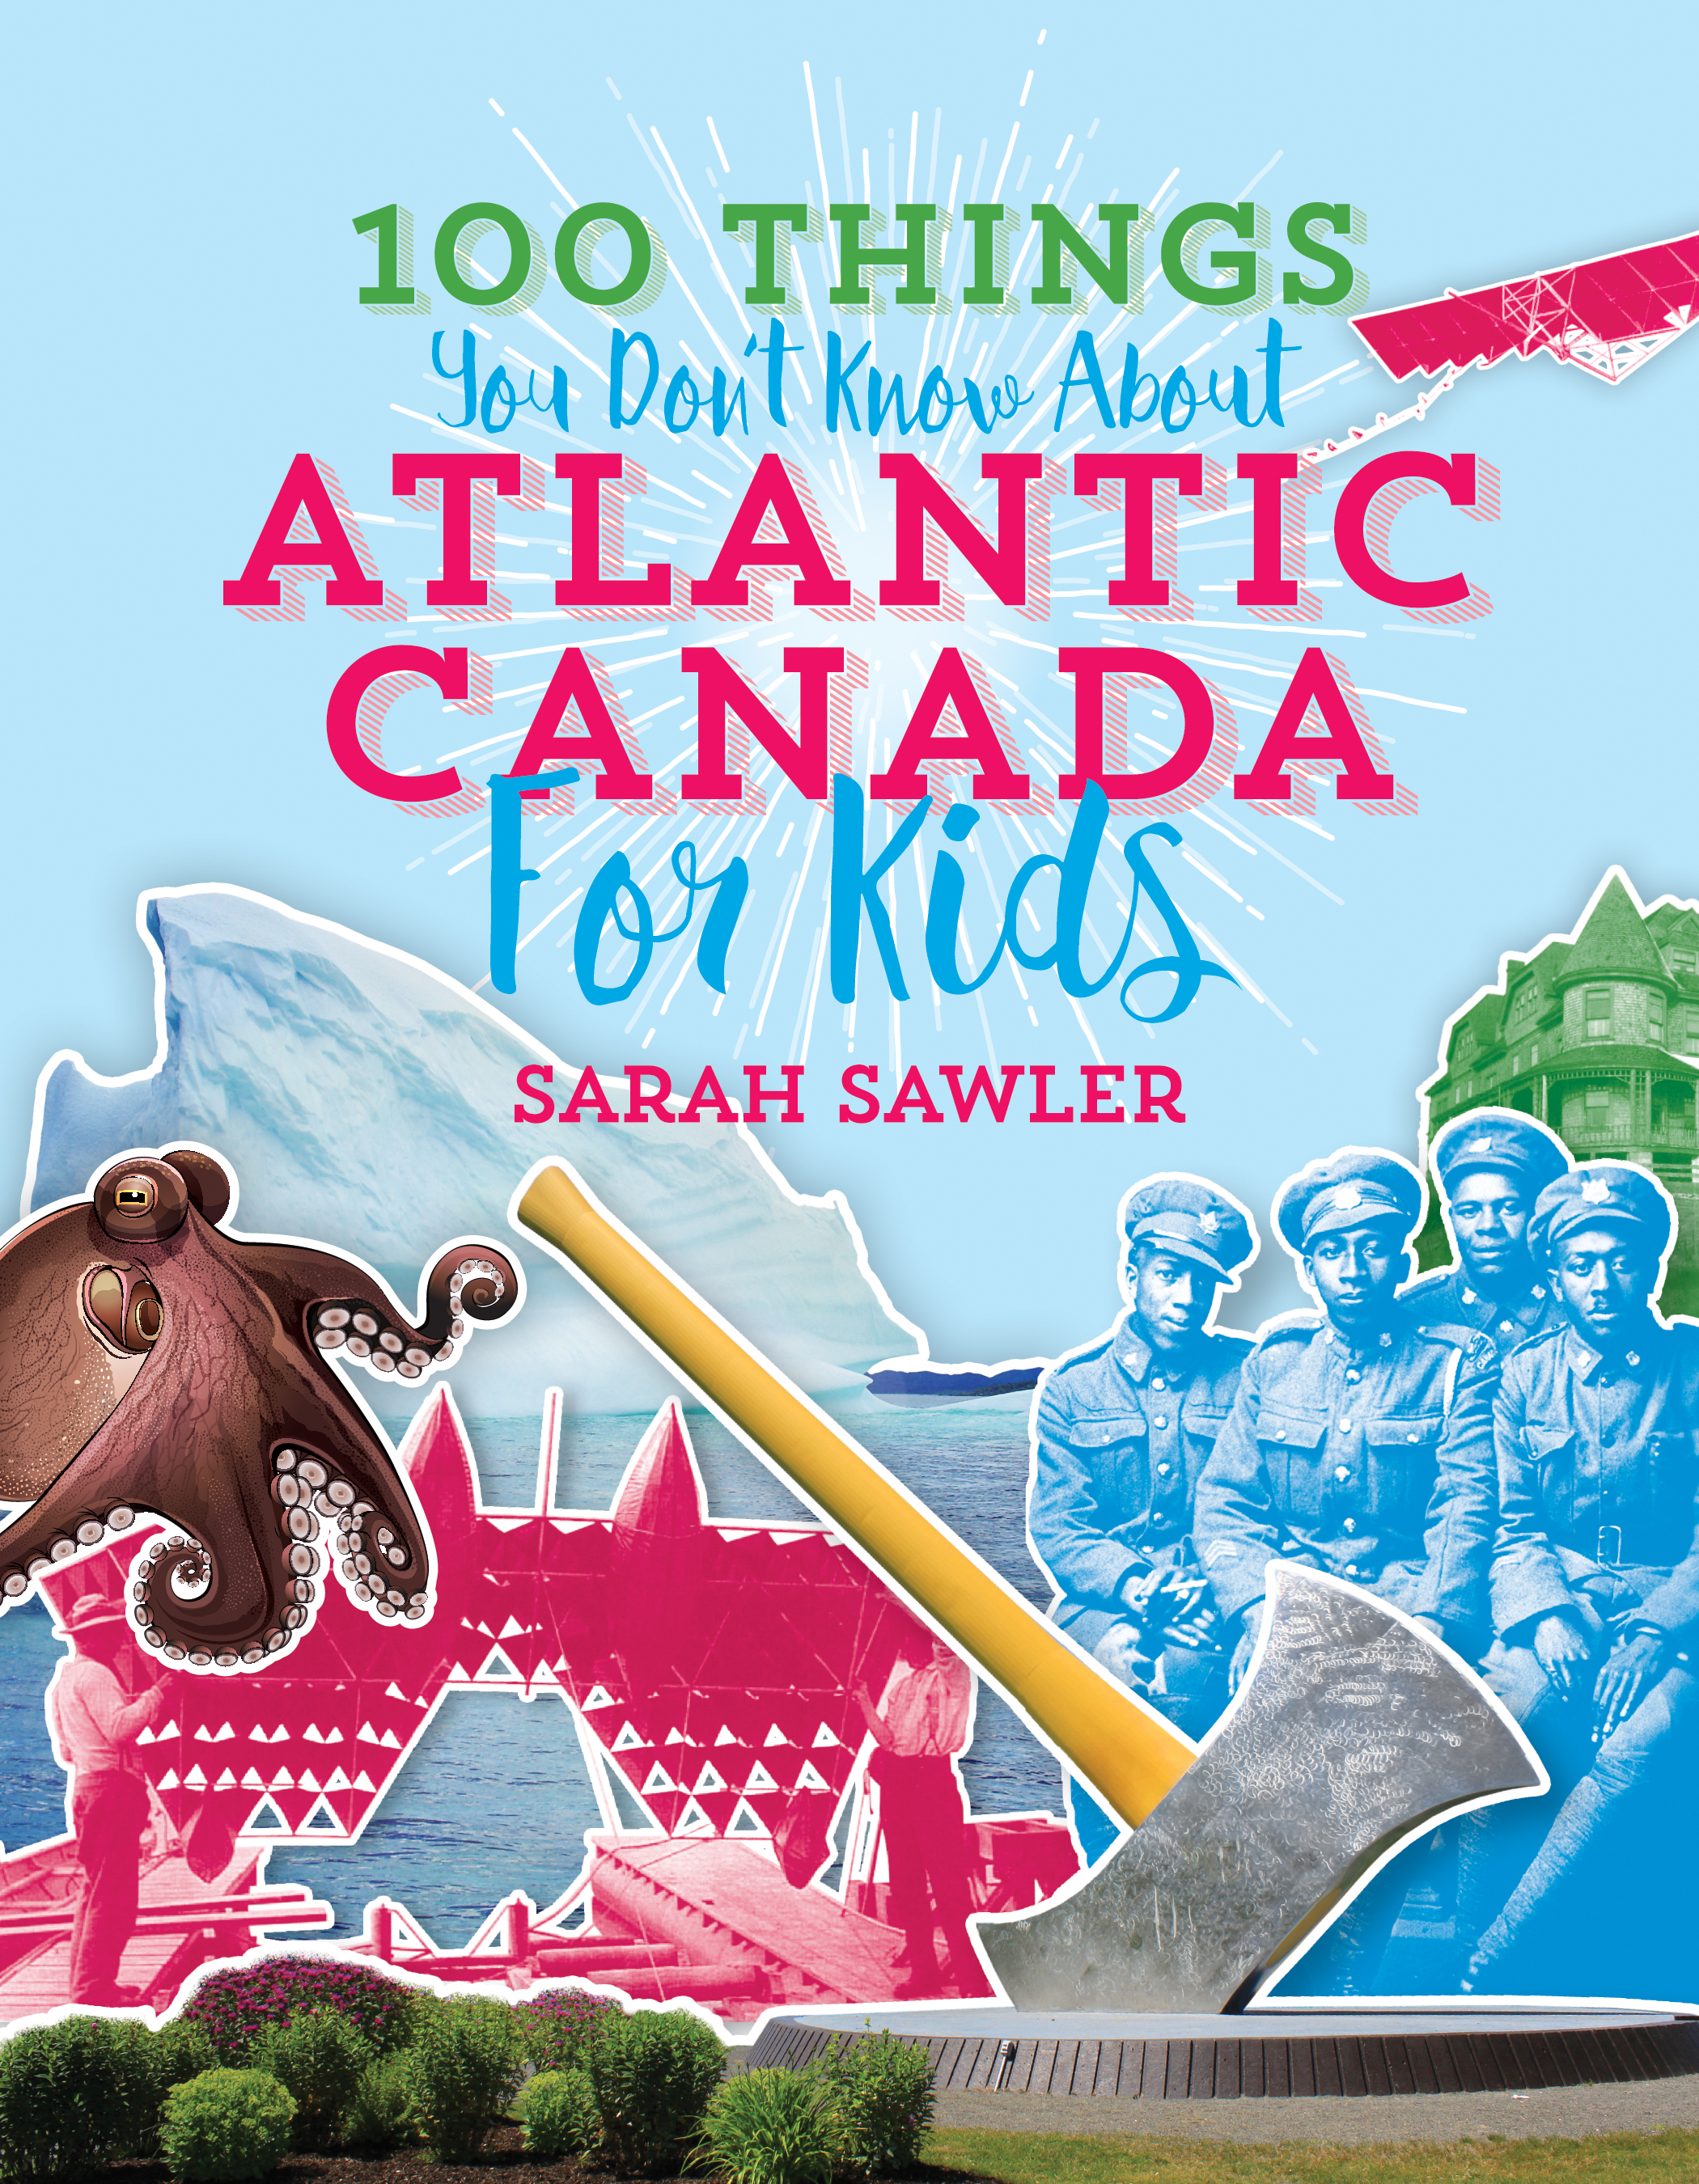 100 Things You Don’t Know About Atlantic Canada (for Kids)